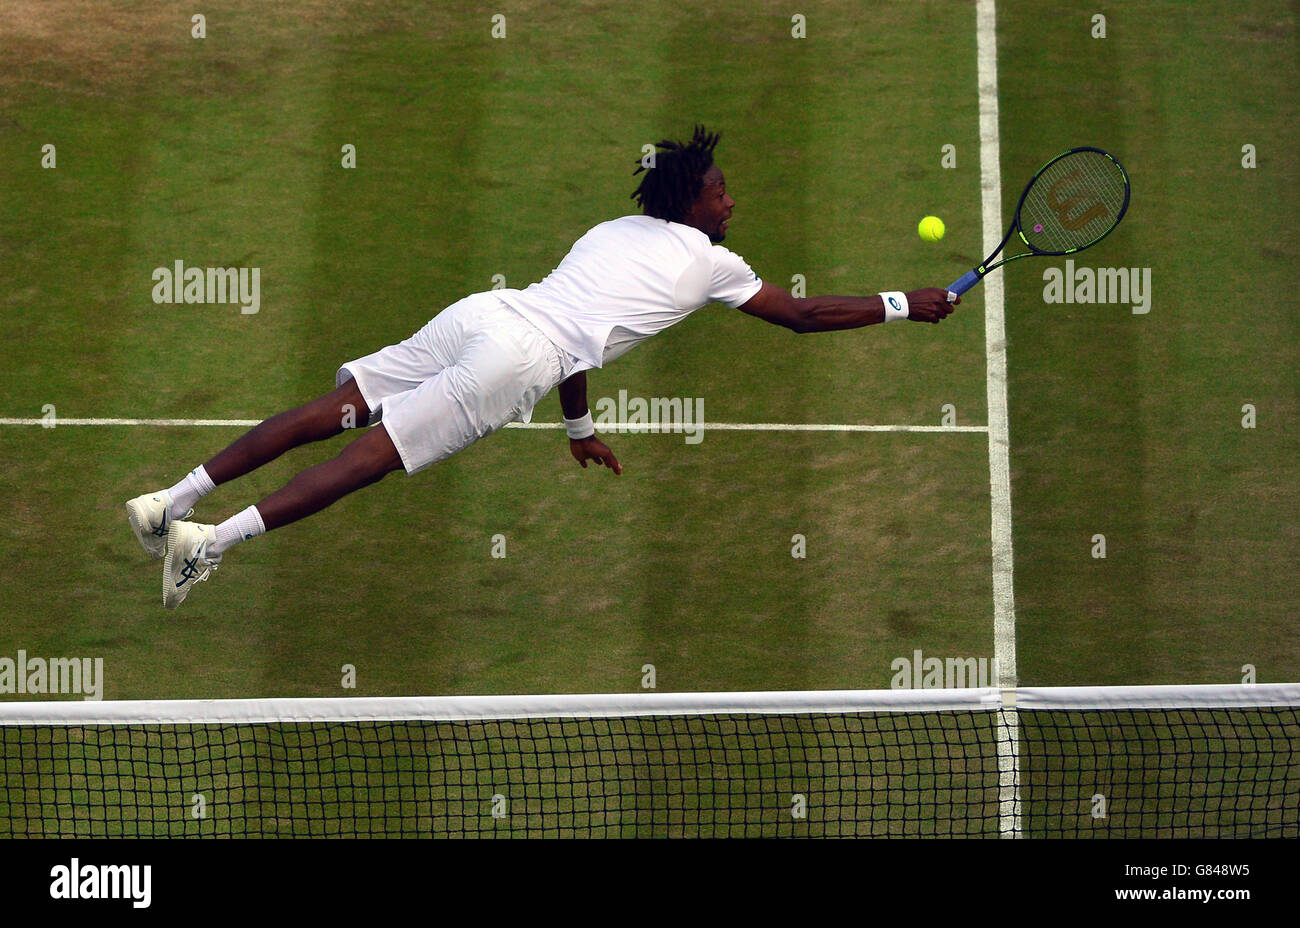 Gael Monfils in action against Gilles Simon during day Six of the Wimbledon Championships at the All England Lawn Tennis and Croquet Club, Wimbledon. Stock Photo